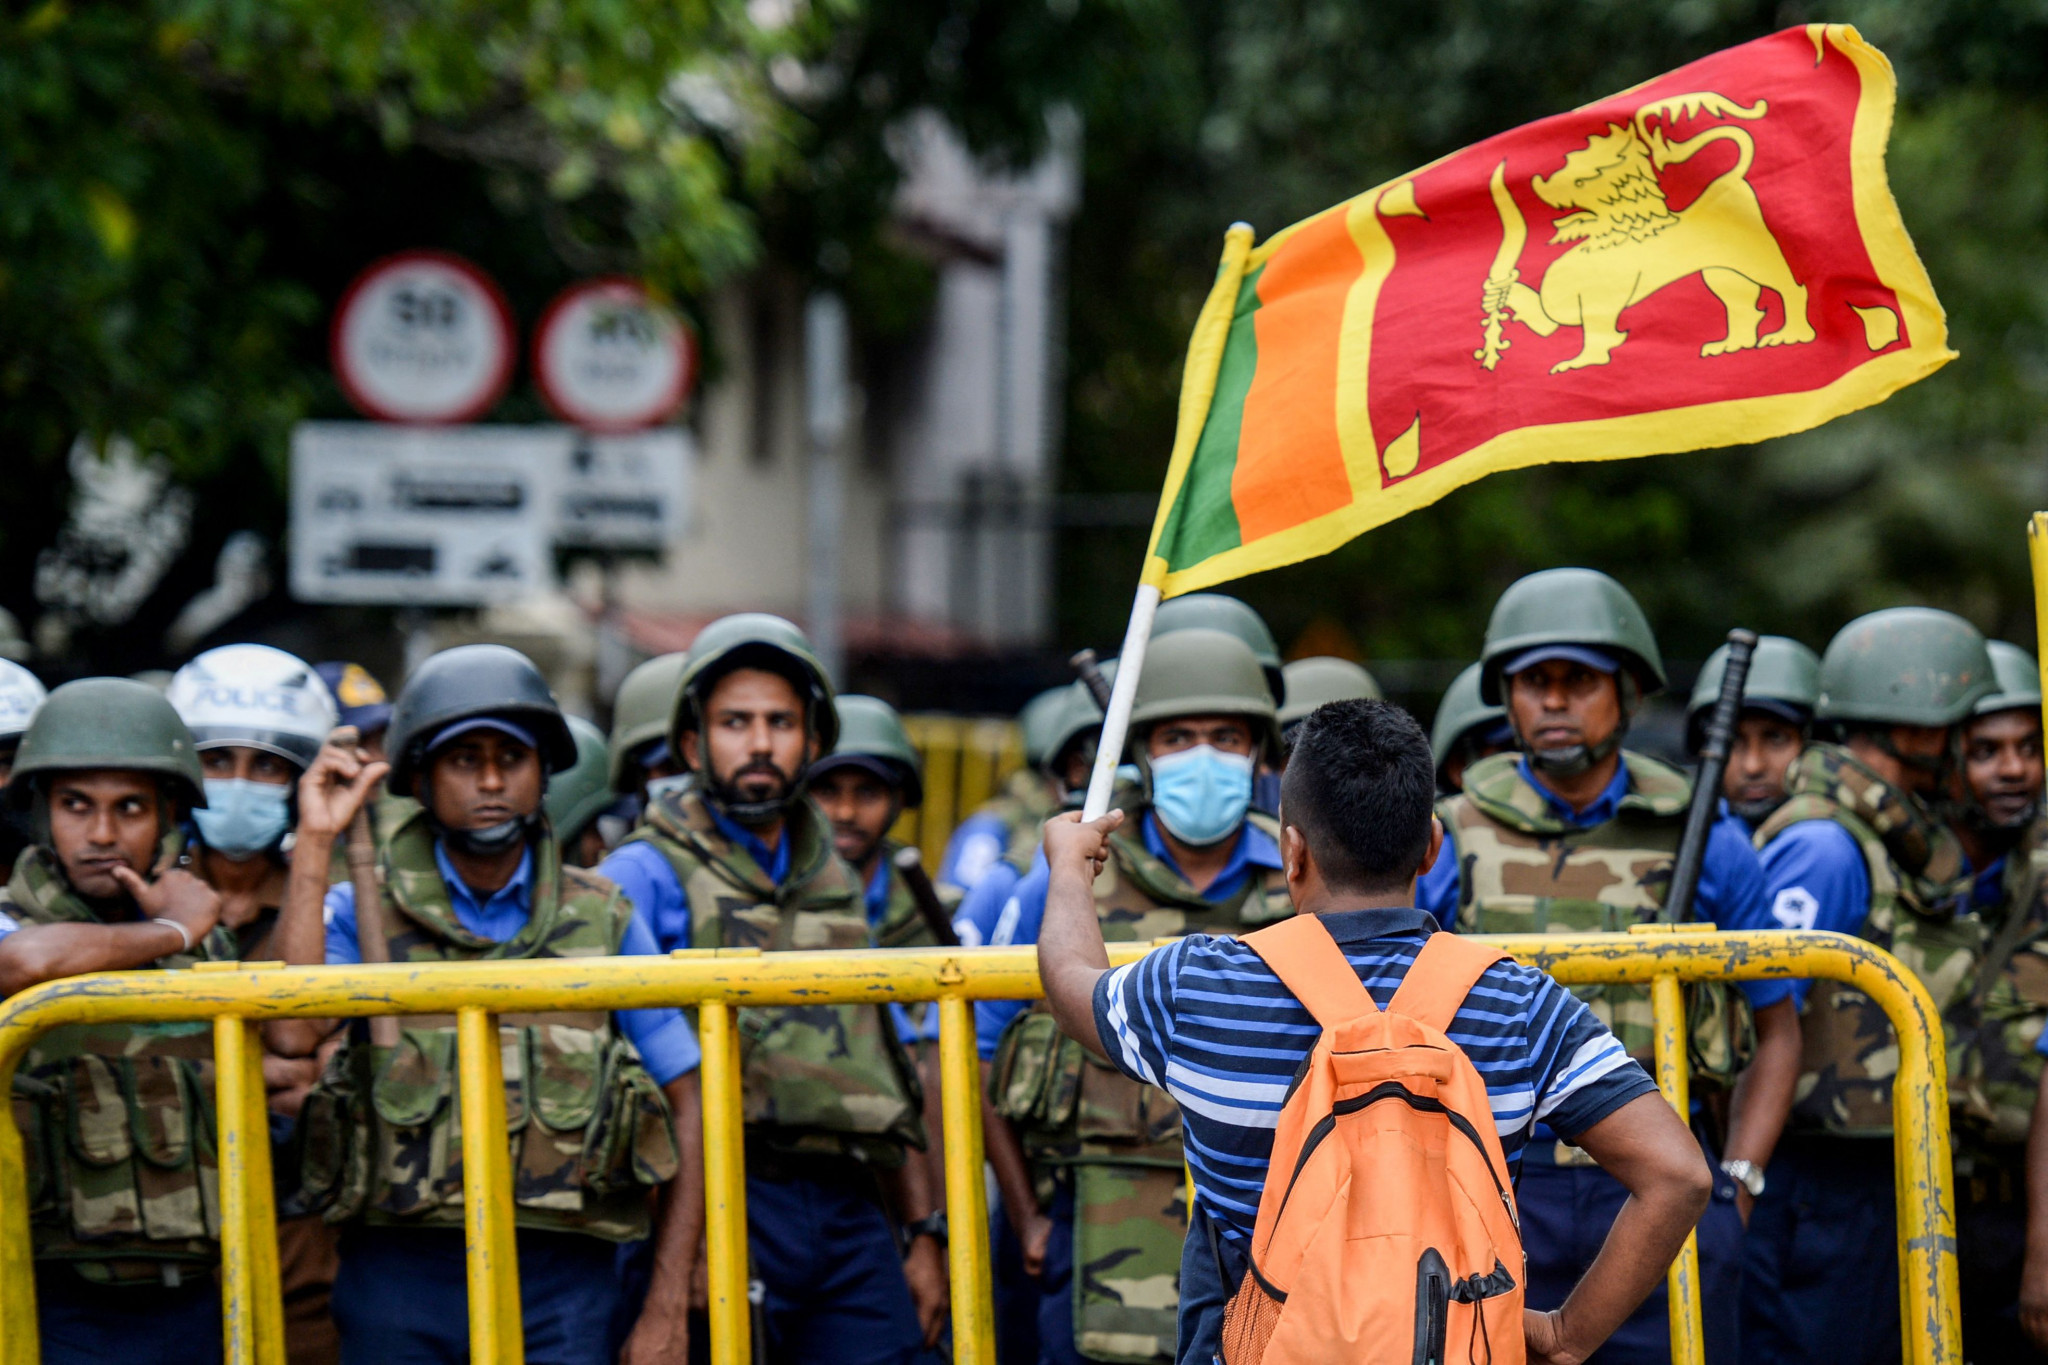 Protests have been ongoing in Sri Lanka over the Government's economic policy since March ©Getty Images